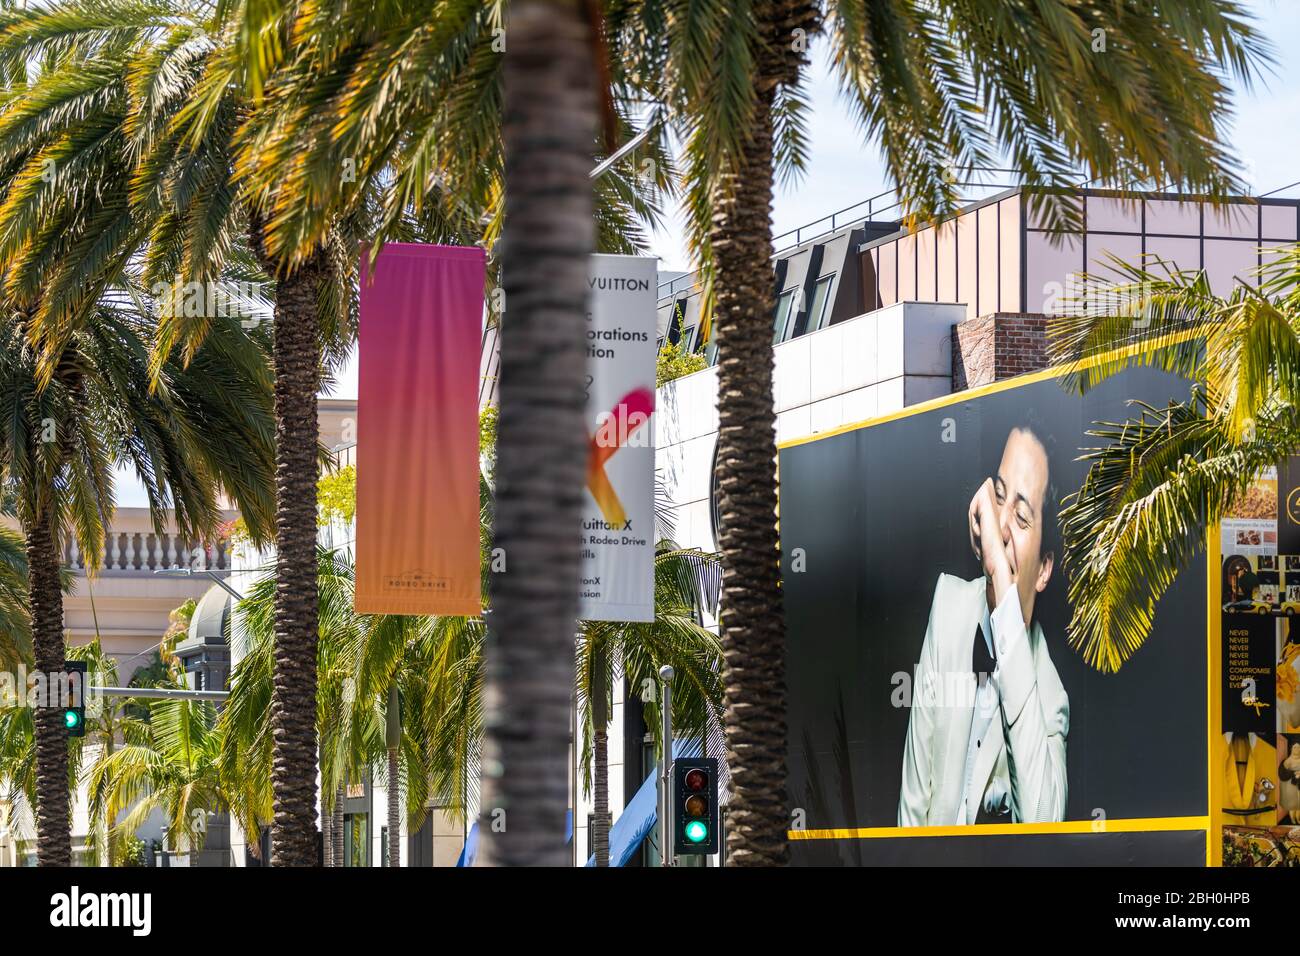 Close up of a part of Rodeo Drive, with a row of palm trees in the foreground and an advertisement in the background Stock Photo